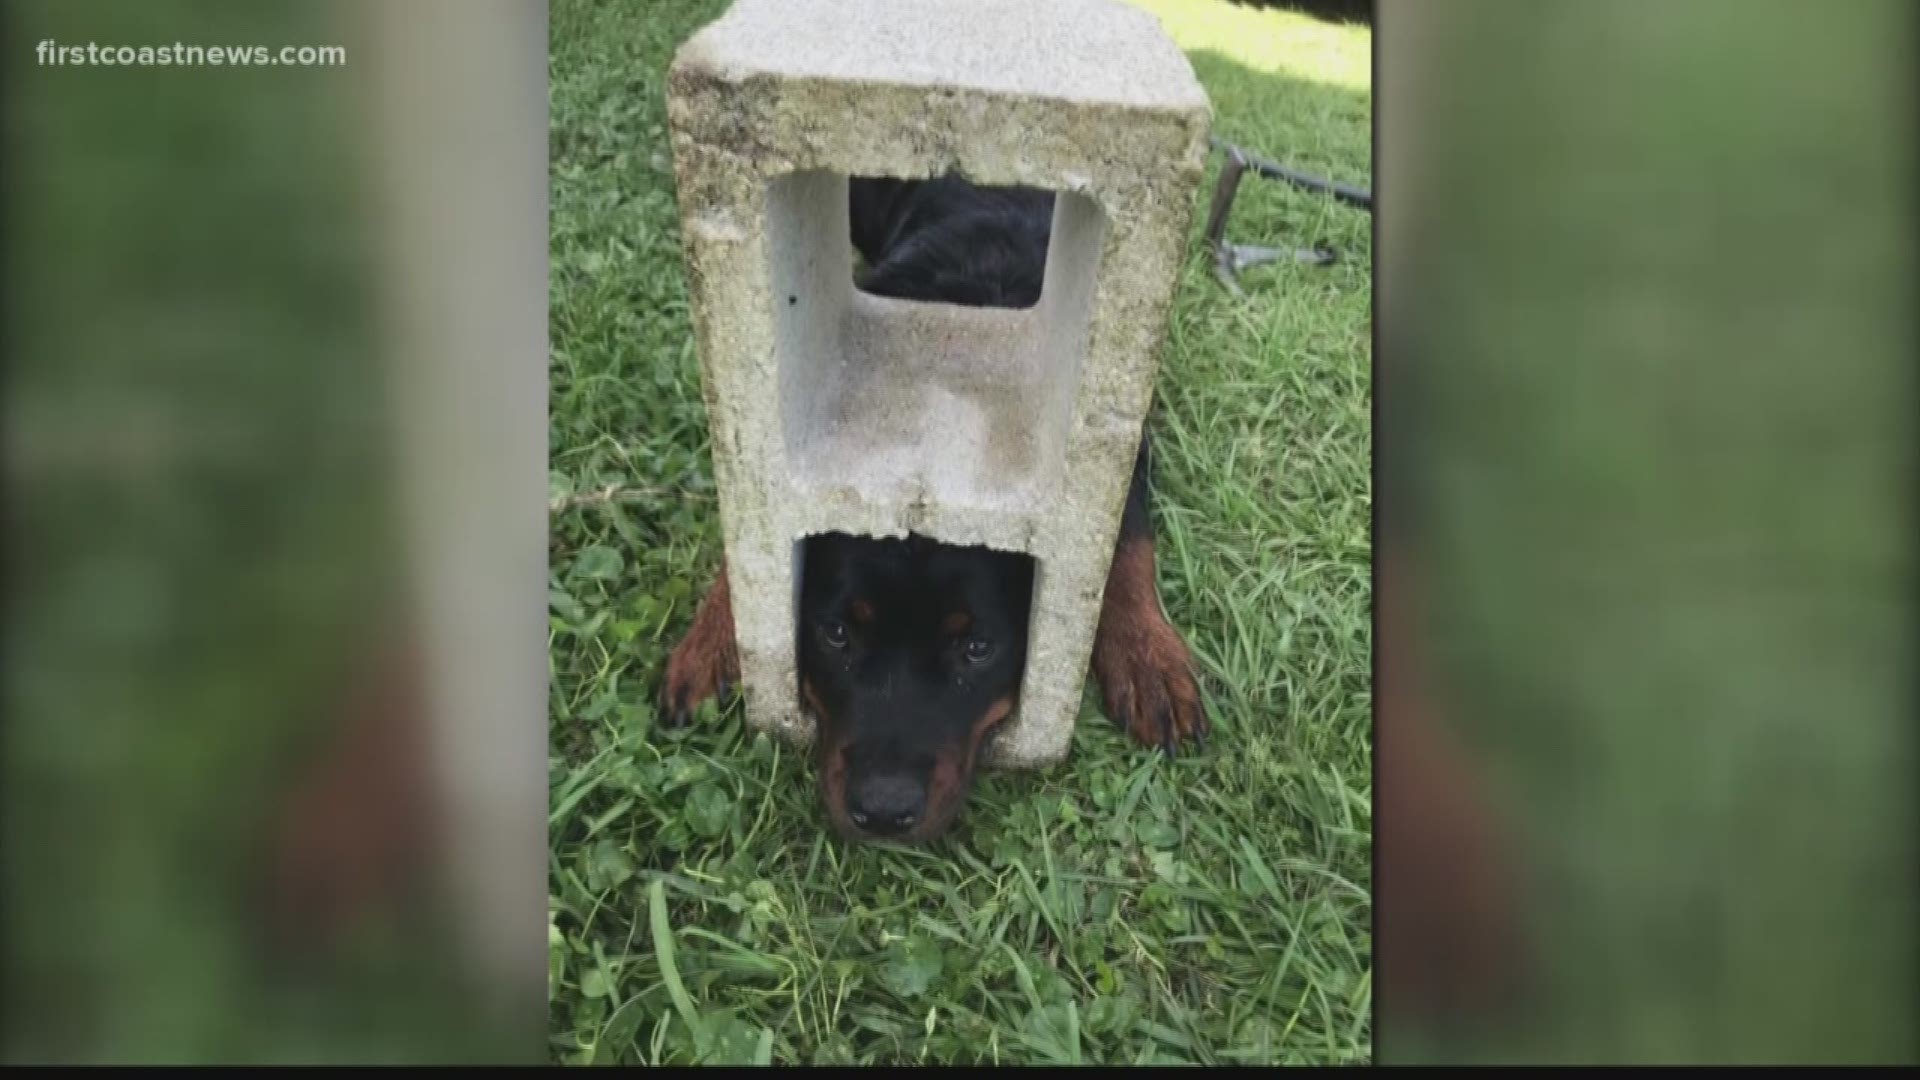 Firefighters said a resident returned to her home in Hastings where she found her 6-month-old puppy, Fifi, stuck with her head wedged inside one of the holes of the block.